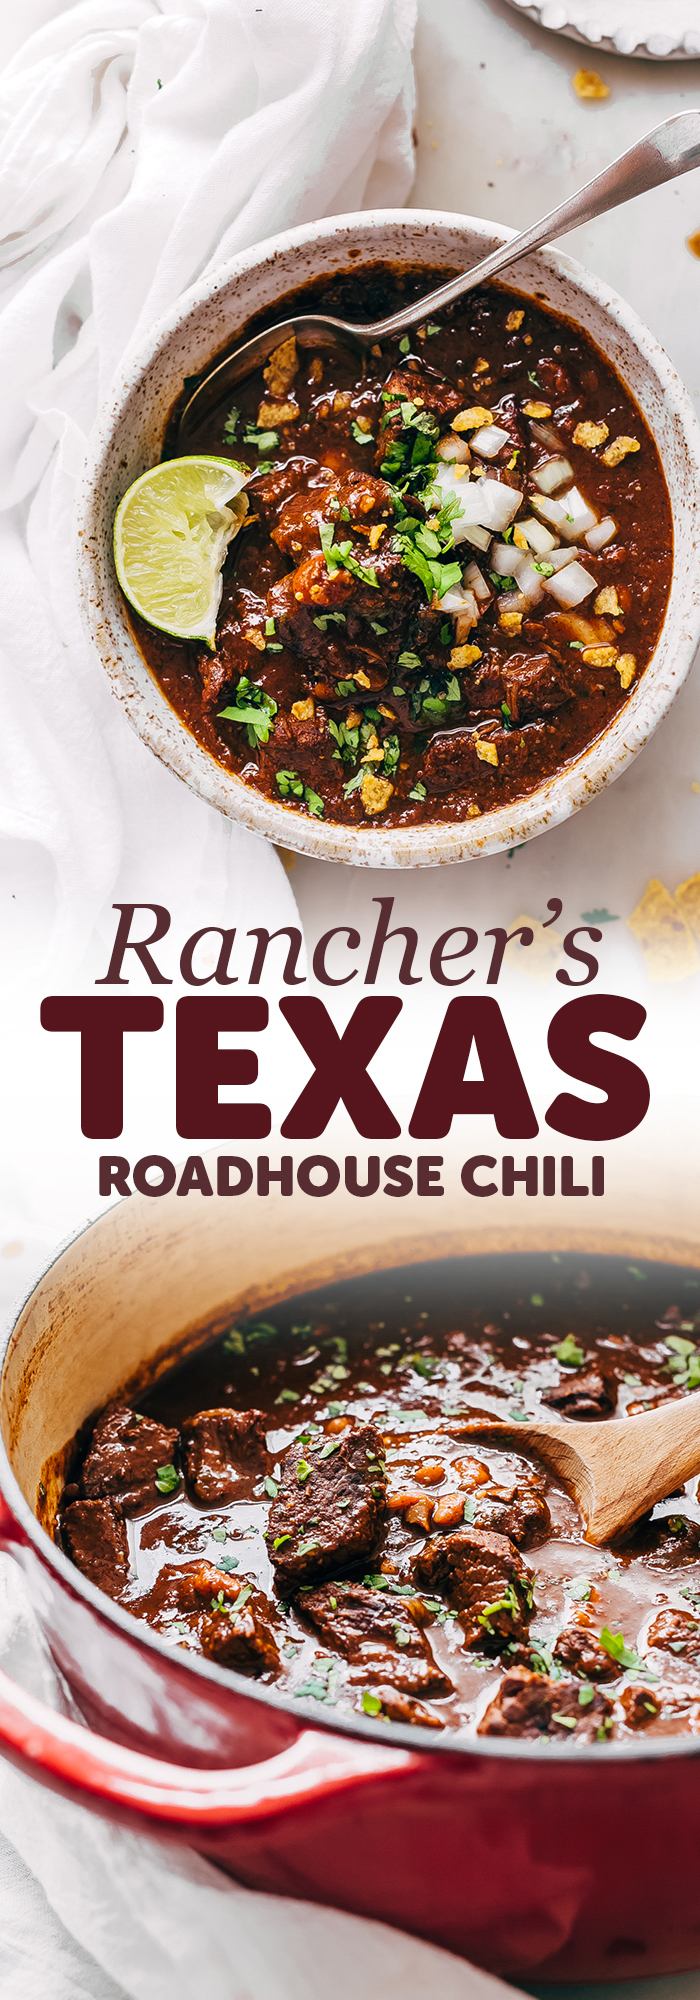 Rancher's Texas Chili (Chili con Carne) - Learn how to make texas chili or chili con carne! This is an easy recipe that uses chuck roast rather that ground beef and is so hearty and filling! #texaschili #chilirecipe #heartychili #homemadechili #chuckroastchili | Littlespicejar.com